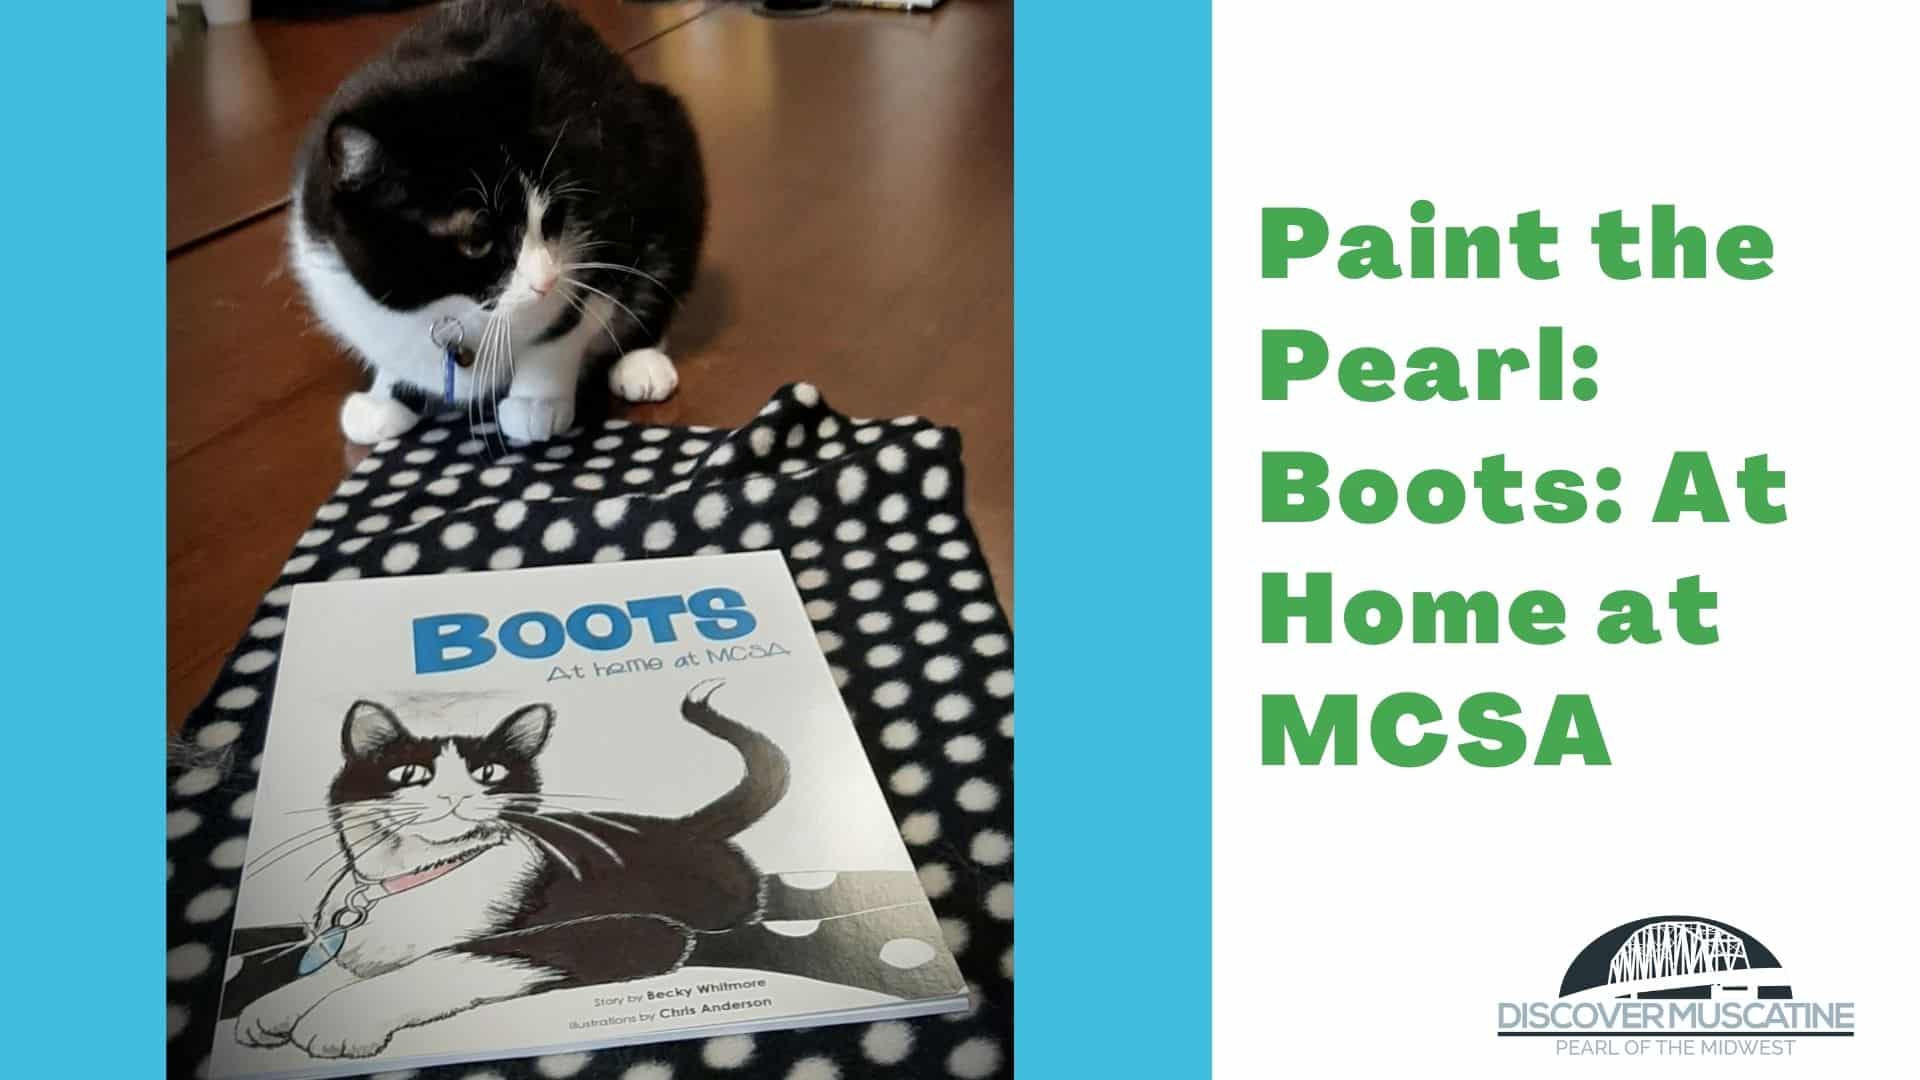 Paint the Pearl: ‘Boots: At Home at MCSA’